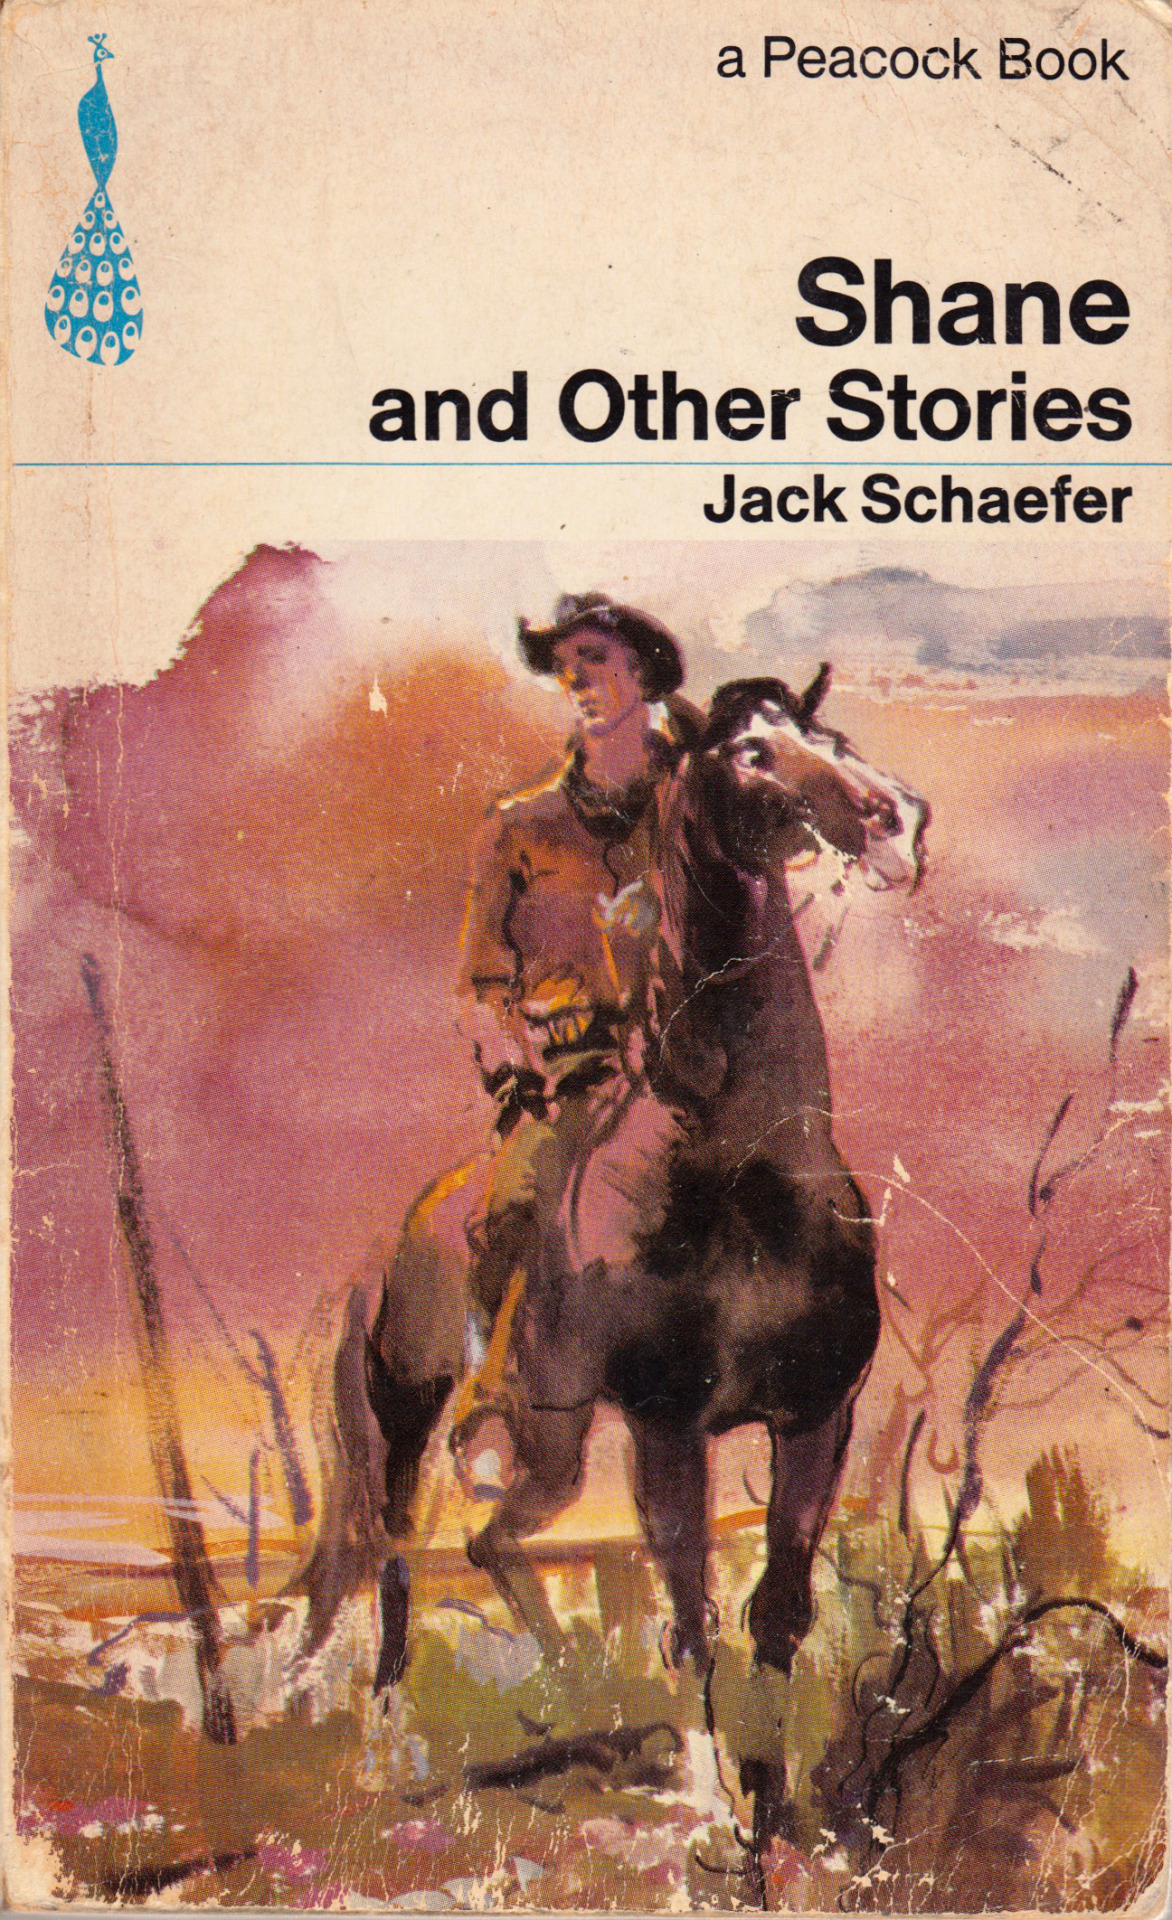 Shane and Other Stories, by Jack Schaefer (Peacock, 1969). From a second-hand bookshop